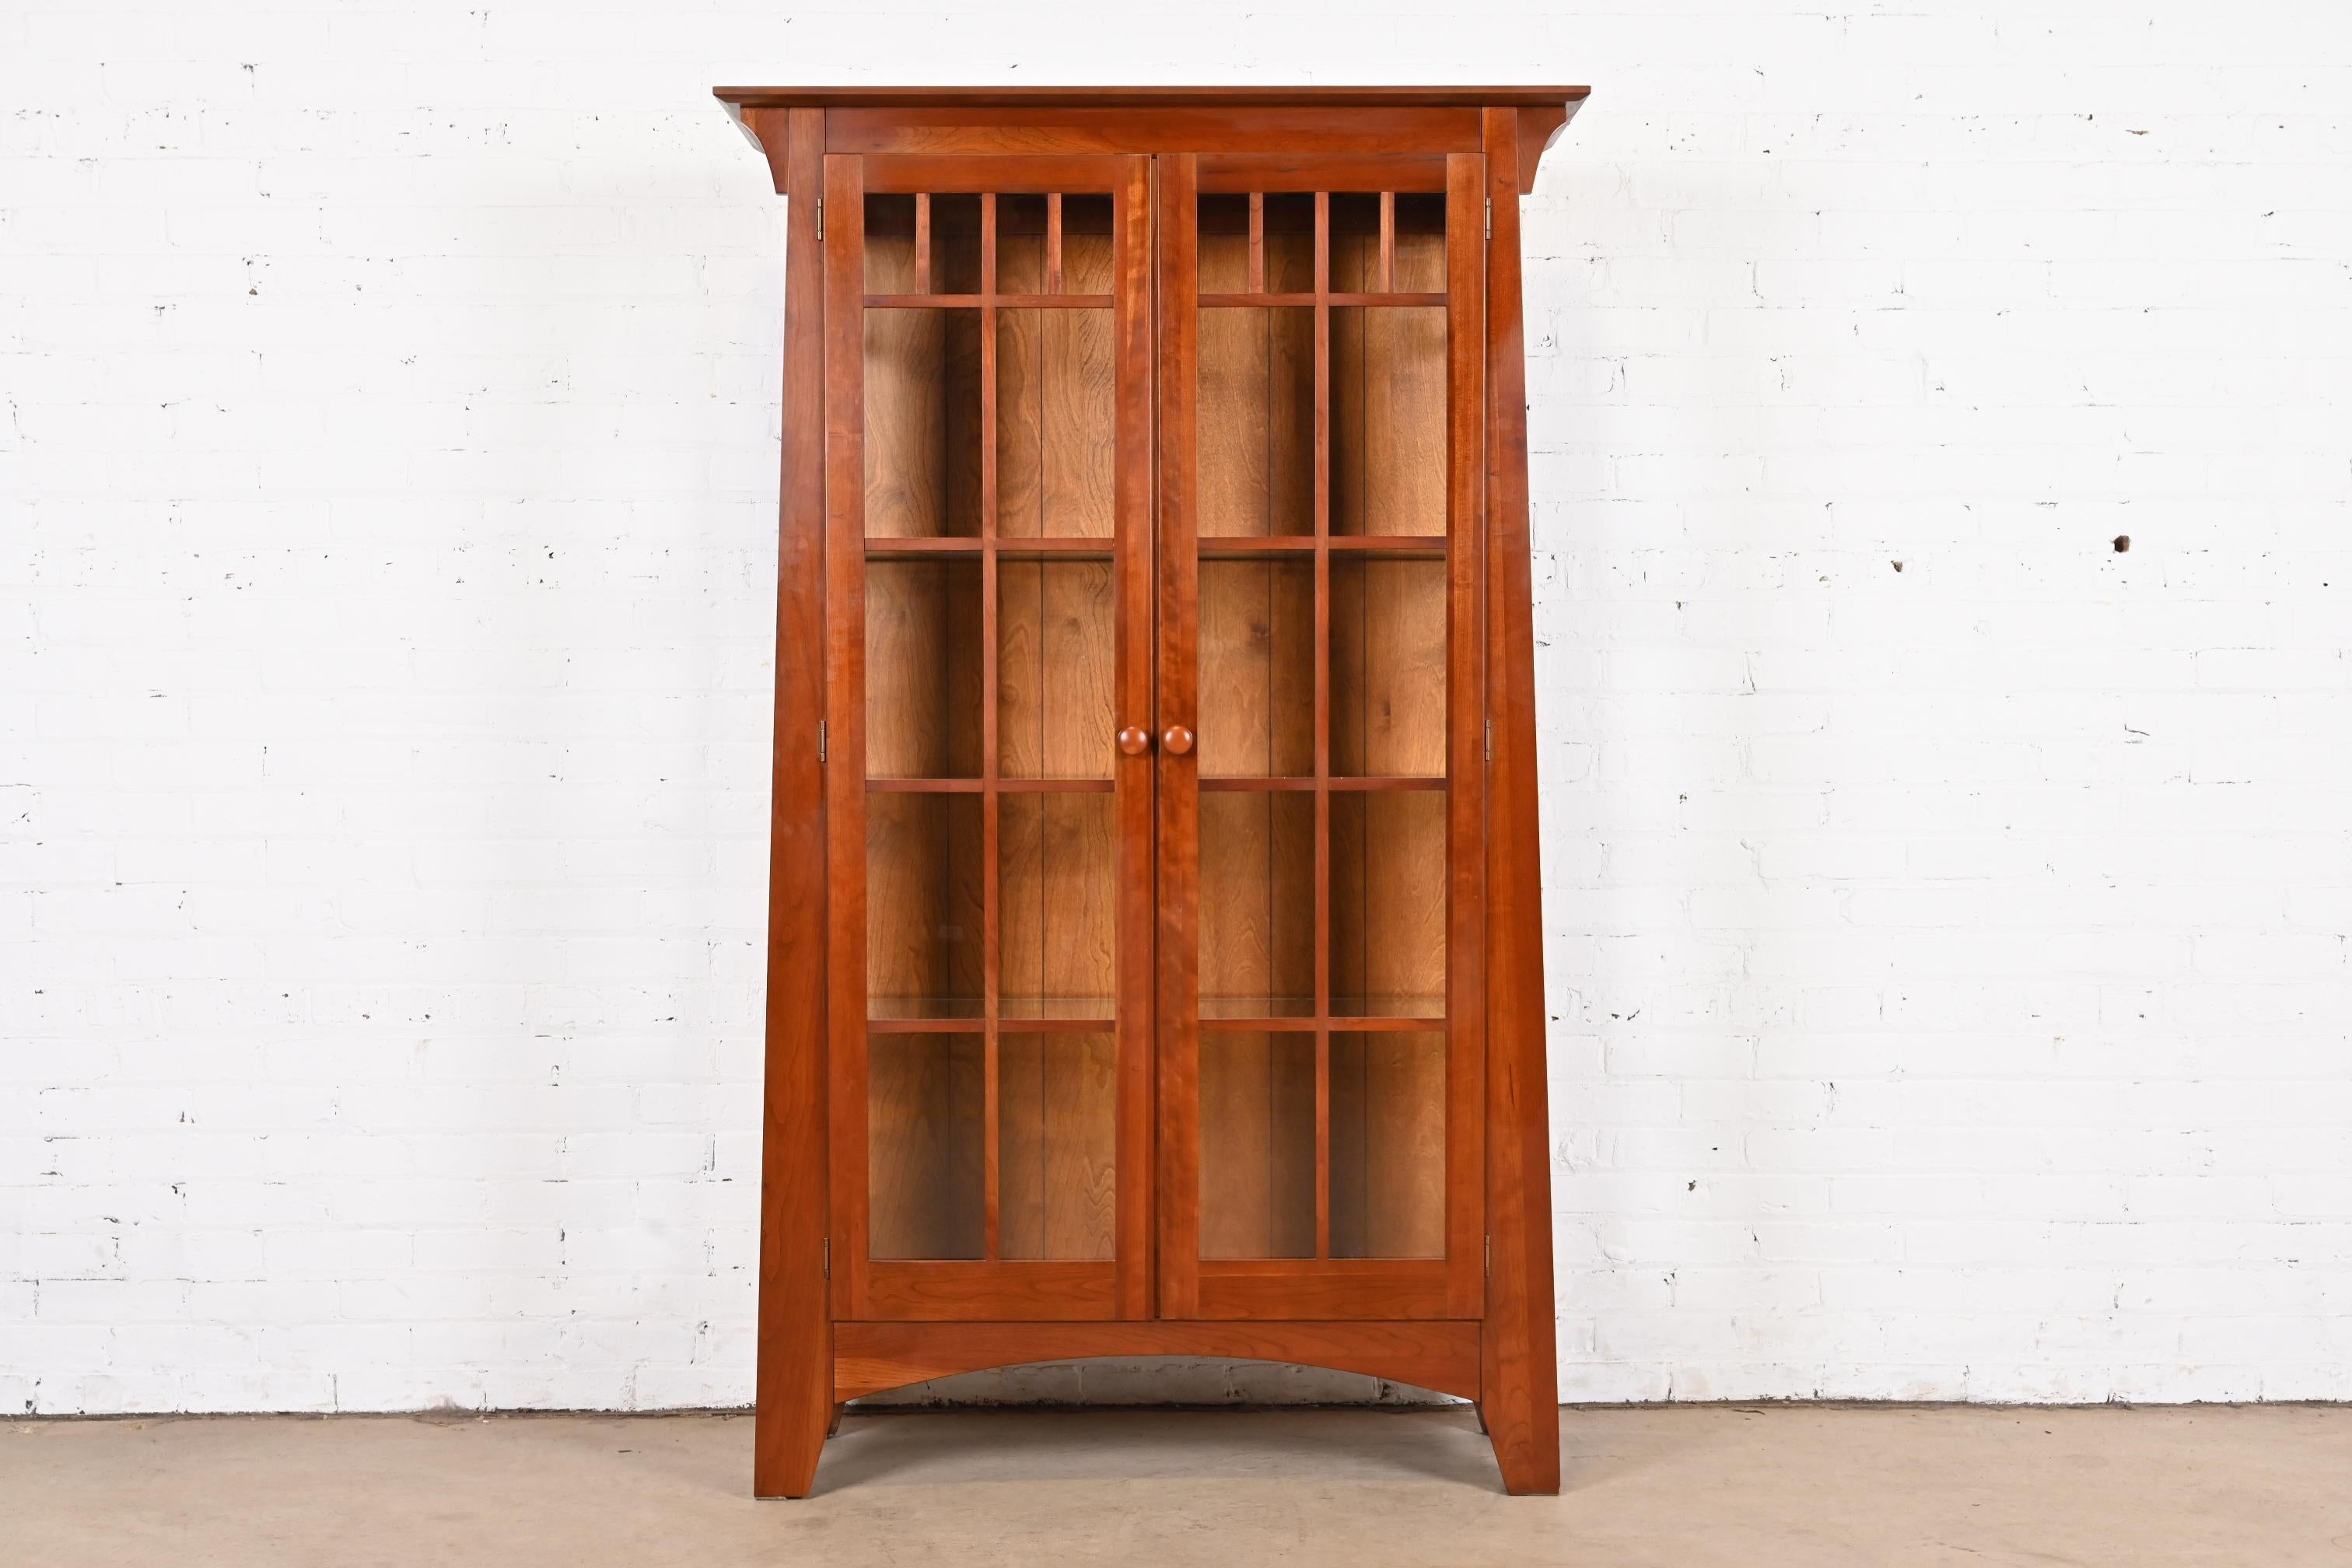 A gorgeous Mission or Arts & Crafts style lighted display cabinet or bookcase

In the manner of Gustav Stickley or Harvey Ellis

USA, circa late 20th century

Solid cherry wood, with mullioned glass front and sides.

Measures: 43